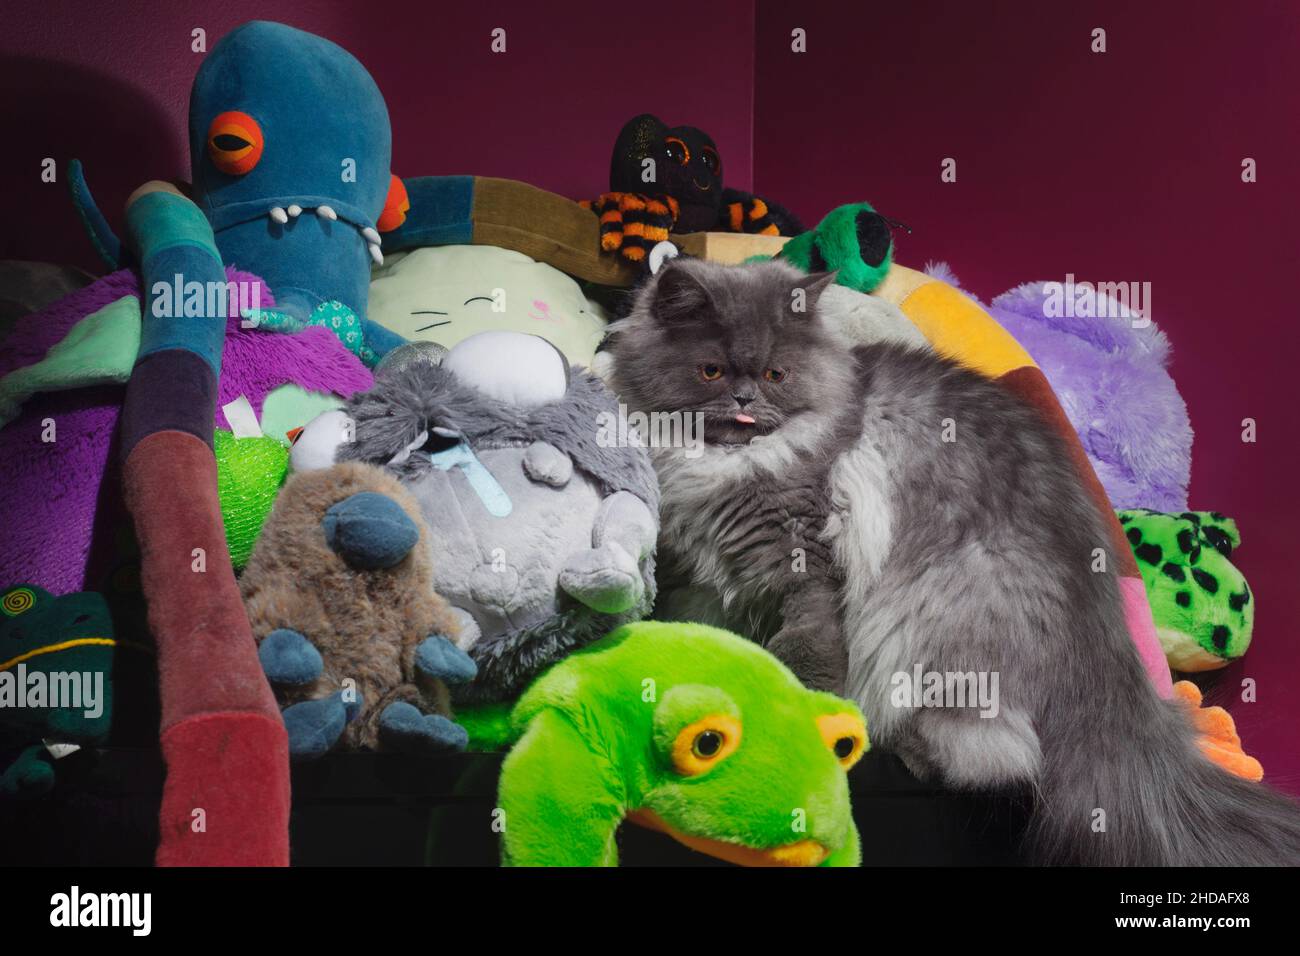 Cute fluffy grey cat with his tongue out, sitting in a pile of stuffed animals. Stock Photo